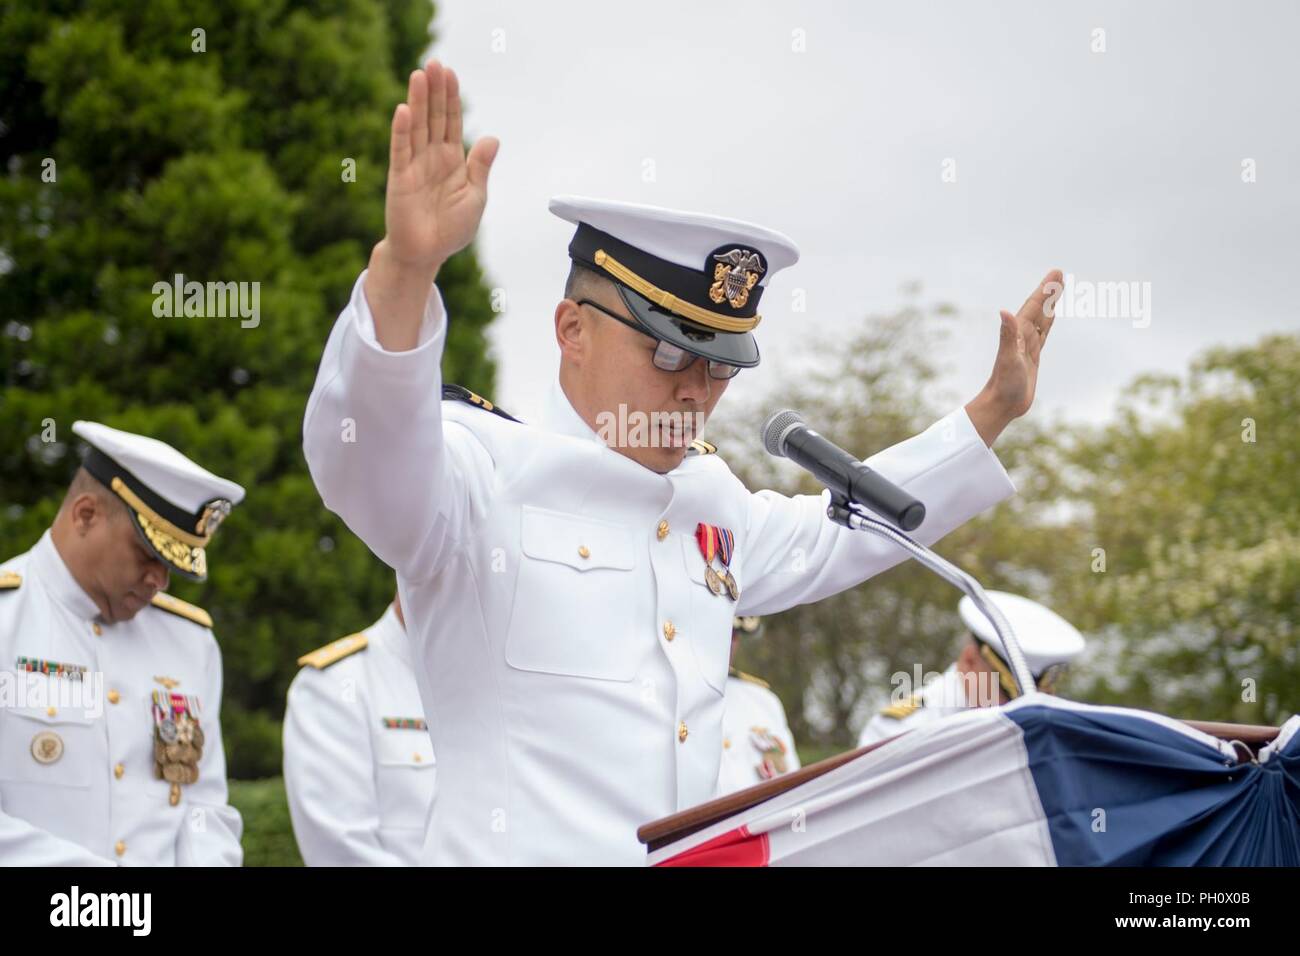 Everett, Wash. (June 22, 2018) Lt. Richard Min, Naval Station Everett's command chaplain, gives the benediction during a change of command ceremony for Naval Station Everett (NSE). During the ceremony Capt. Mike Davis relieved Capt. Mark Lakamp as commanding officer of NSE. Stock Photo